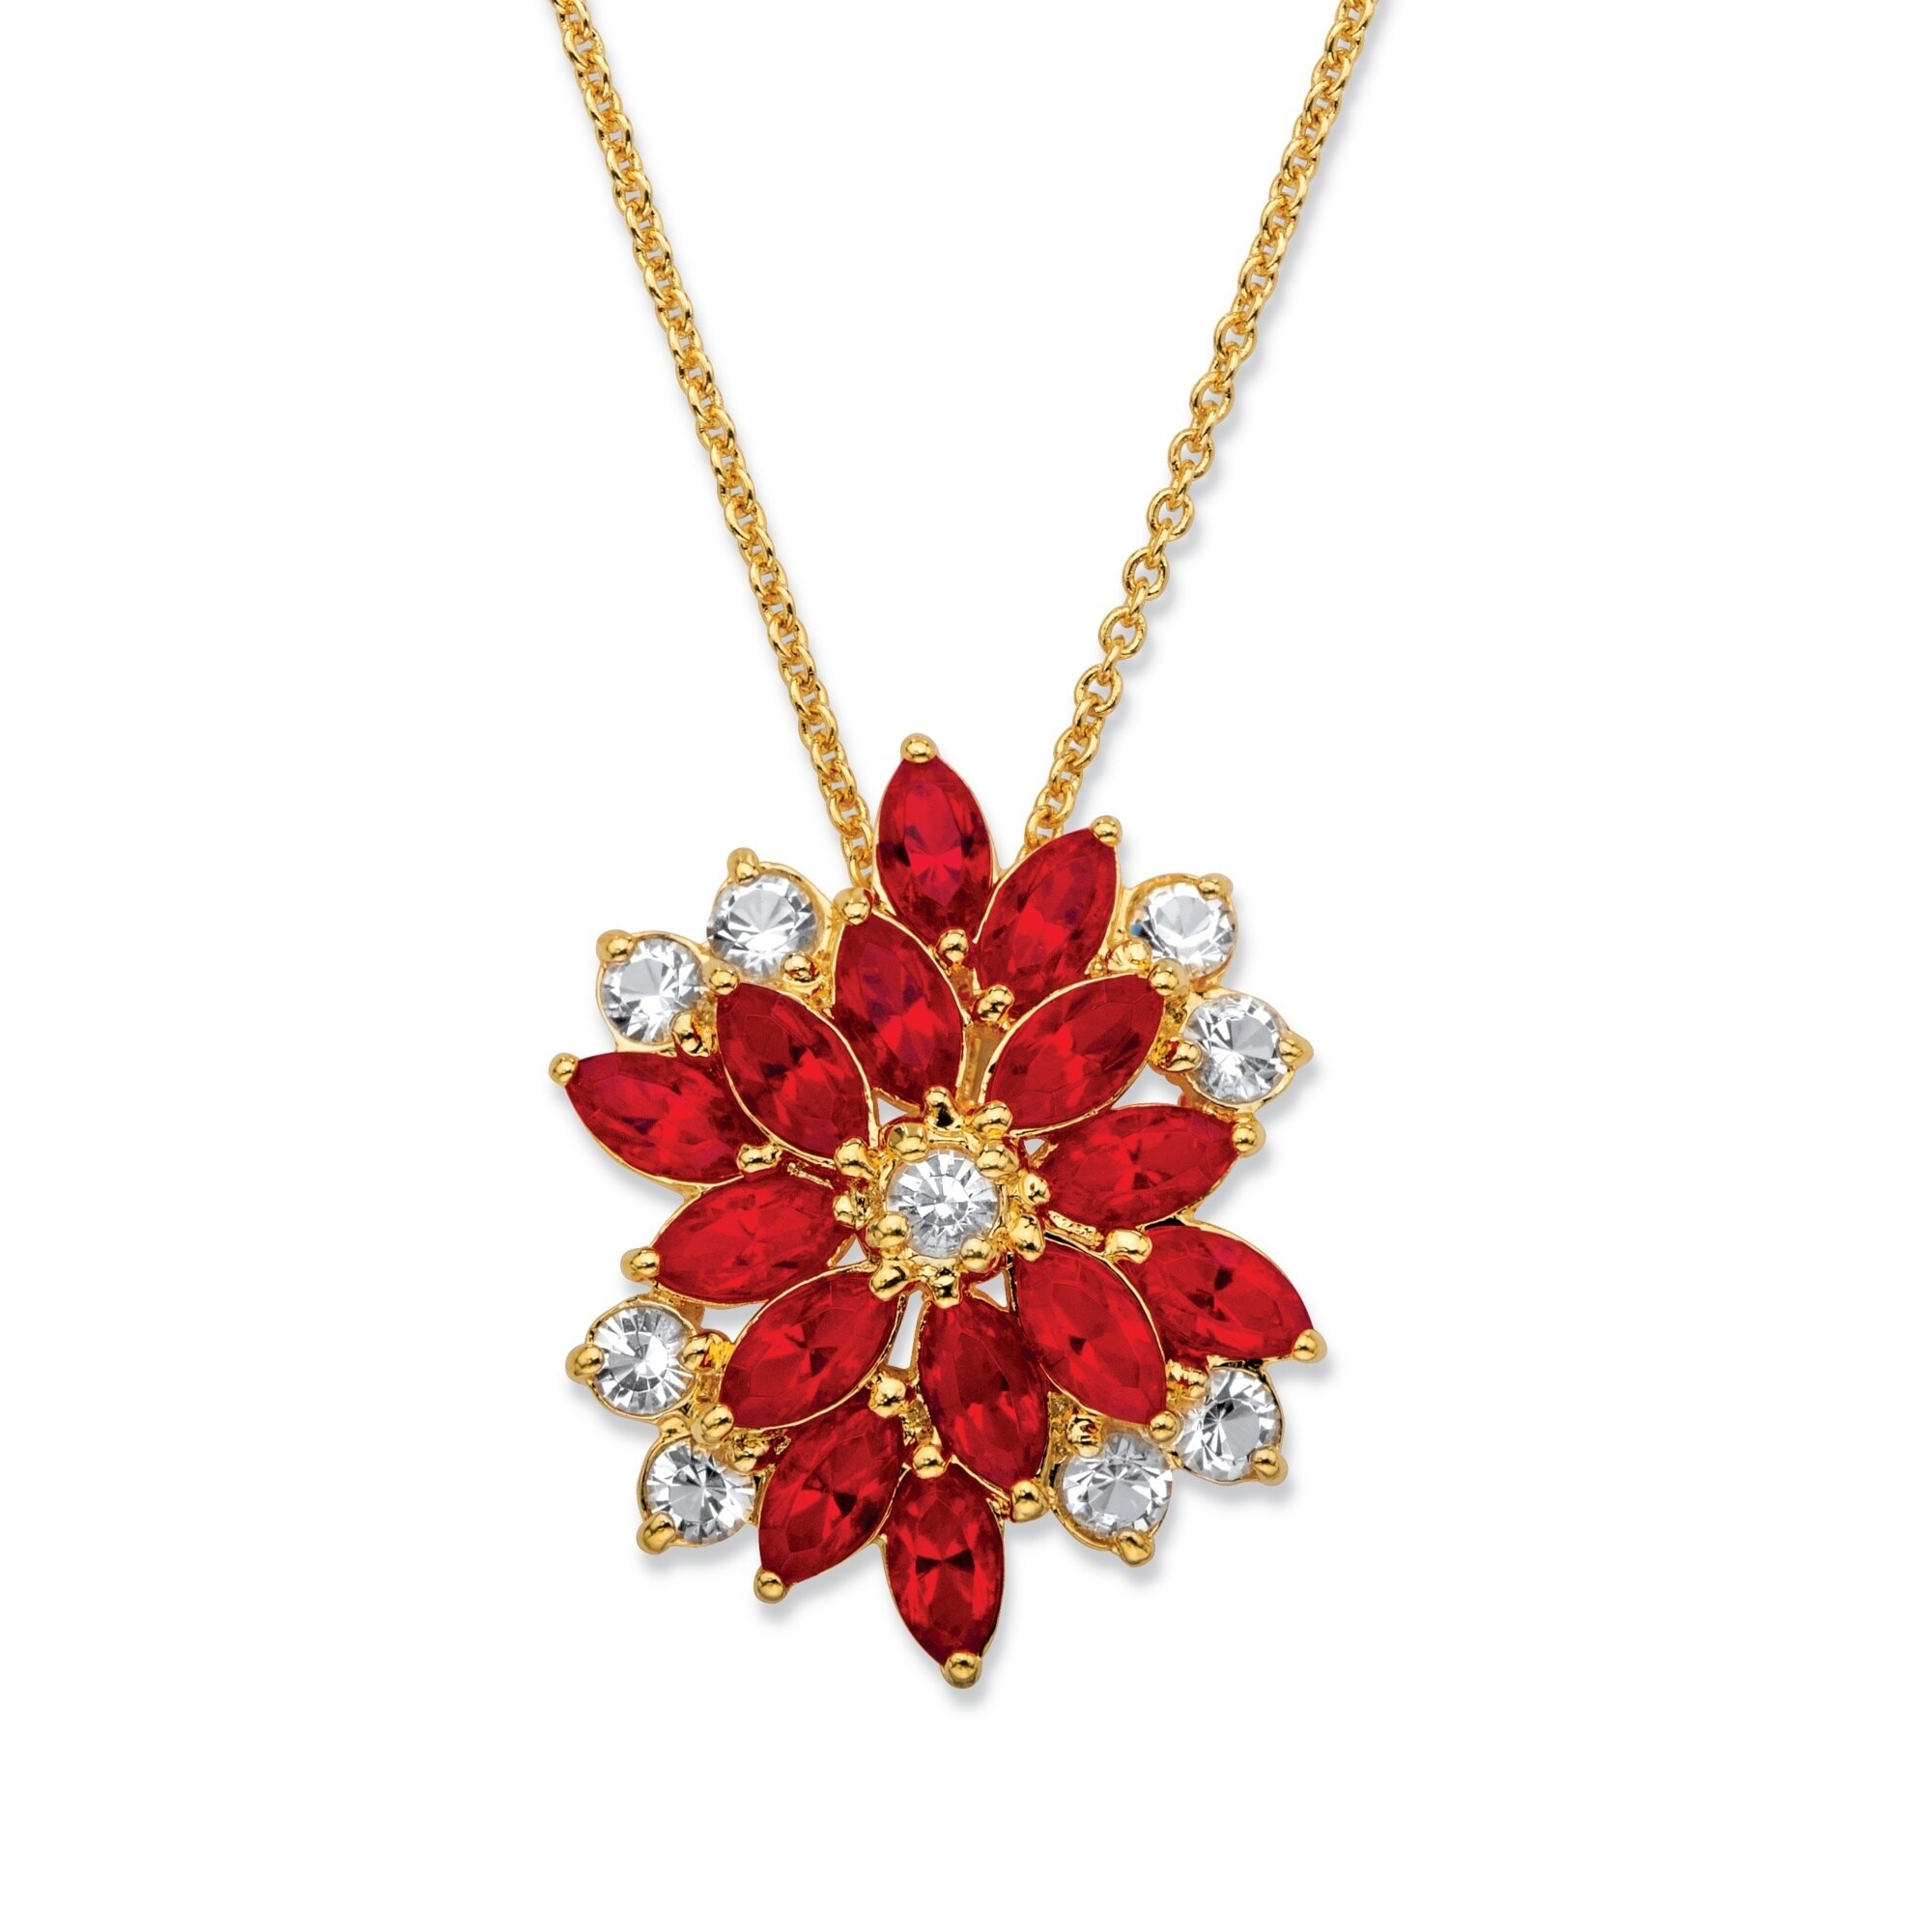 New Cubic Zirconia 18K Yellow Gold Plated Red Ruby Marquise Pendant Free Chain